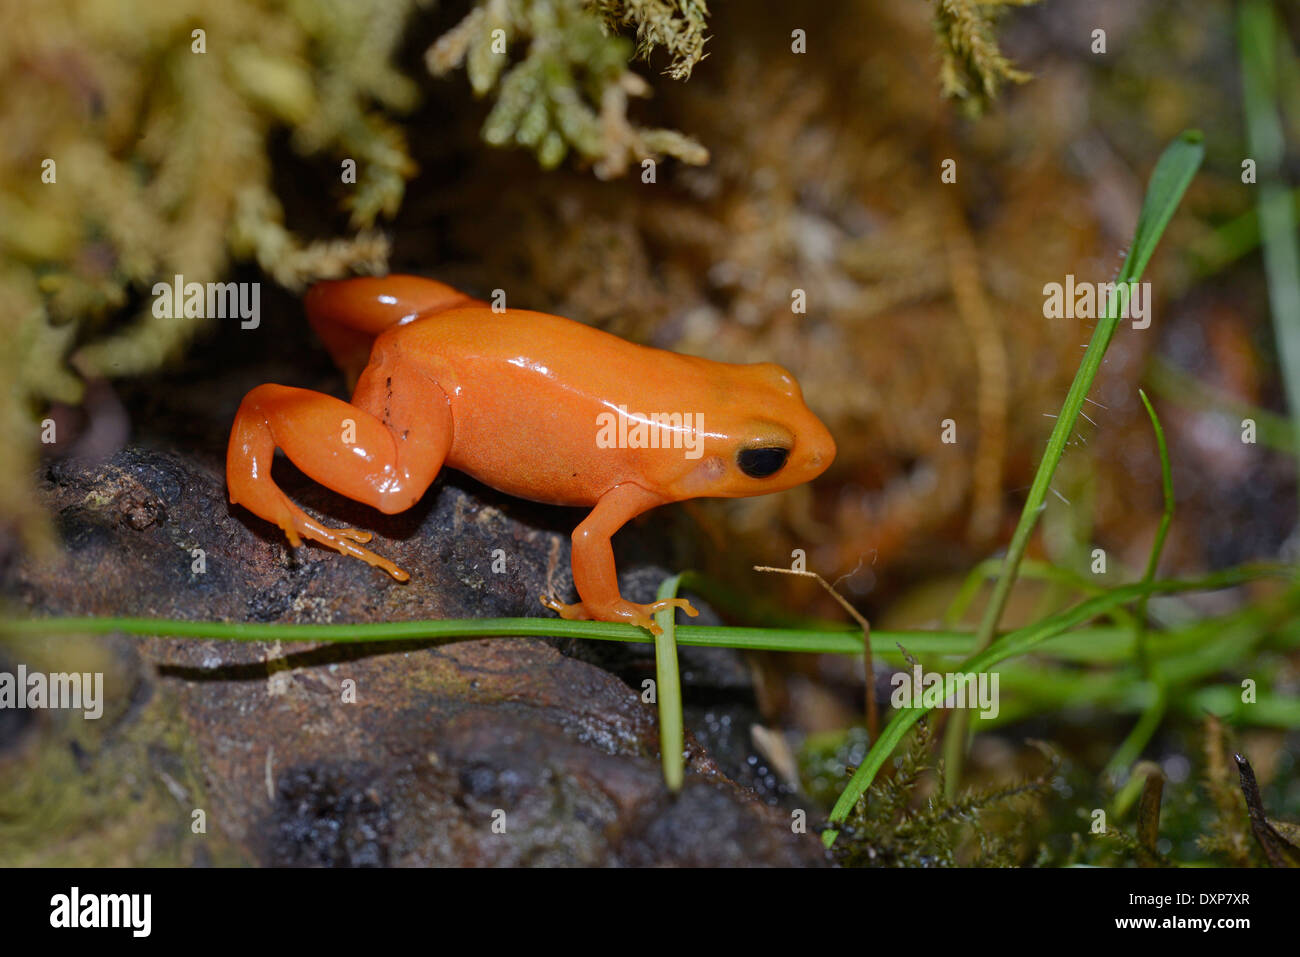 Golden mantella (Mantella aurantiaca). Native to Madagascar and critically endangered in the wild. This is a captive specimen. Stock Photo